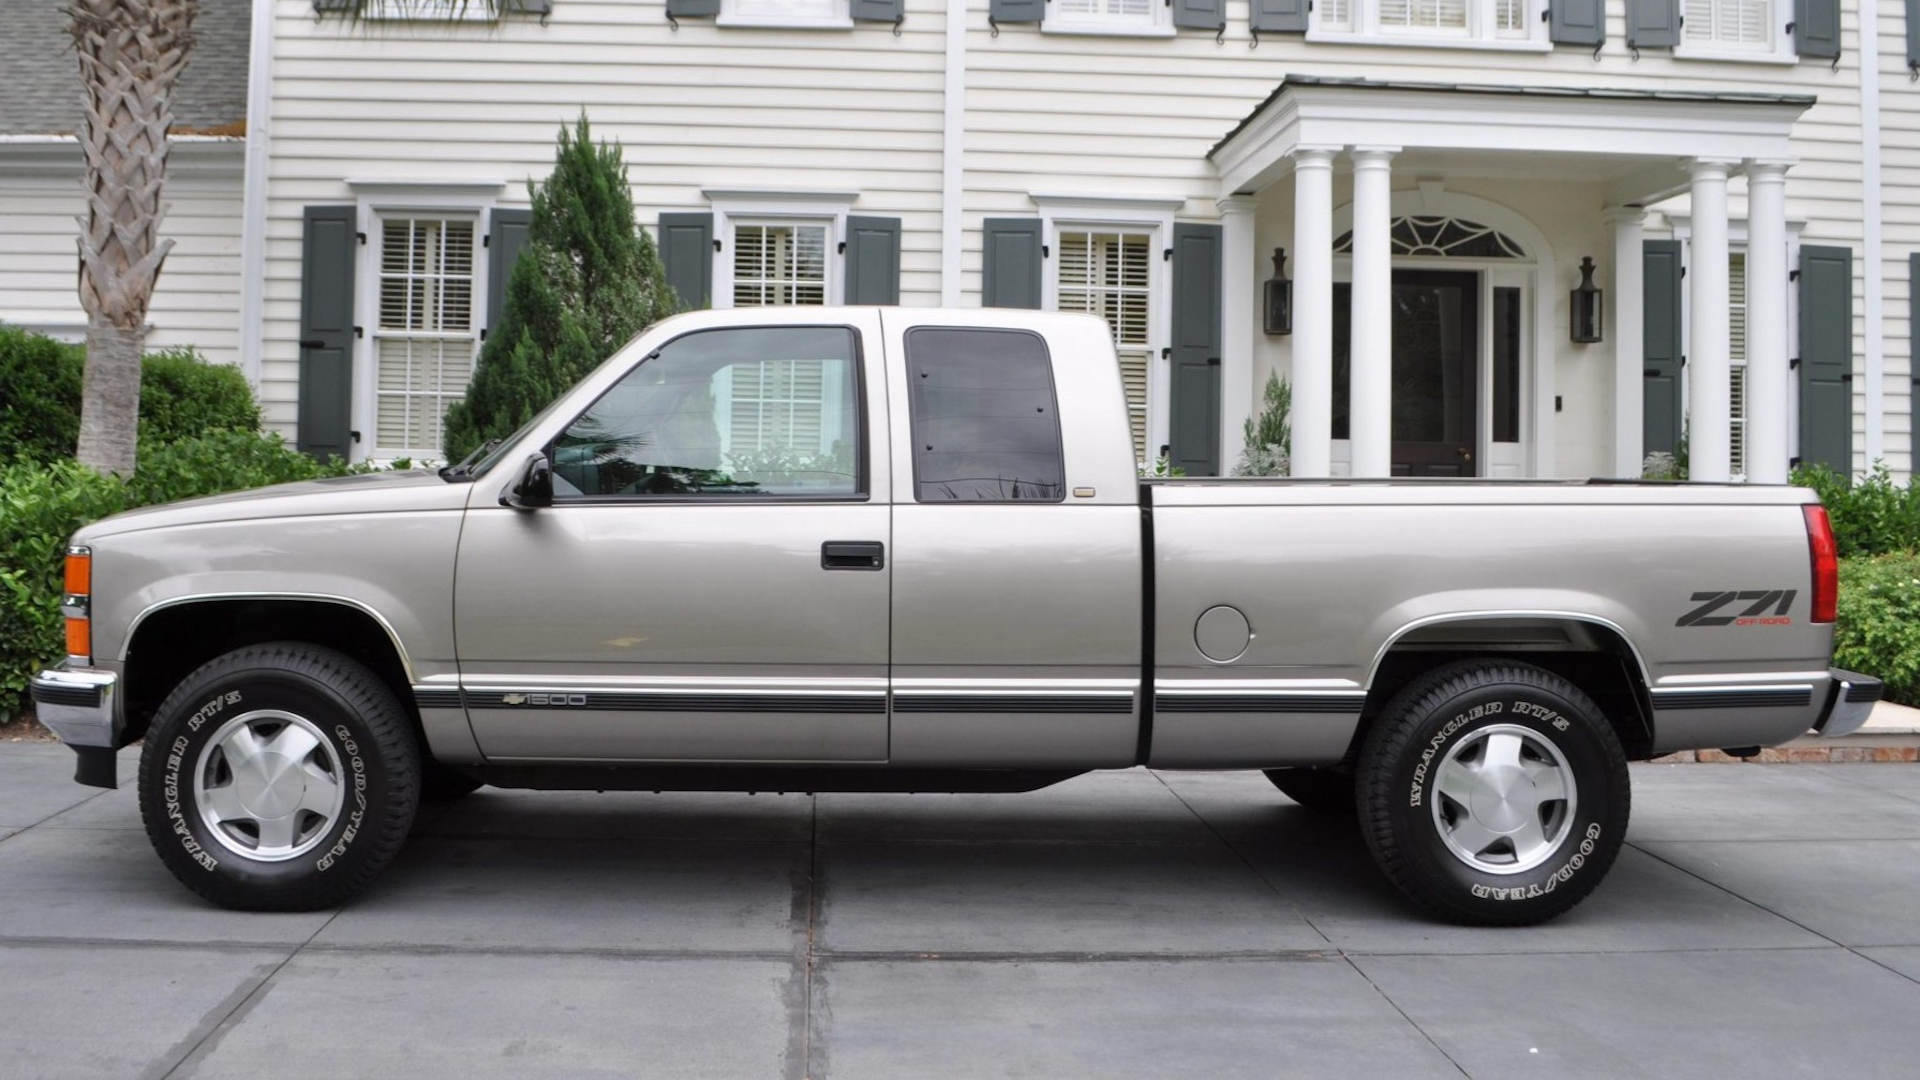 Is This Pristine 1998 Chevy Truck Worth Its Sky High Price